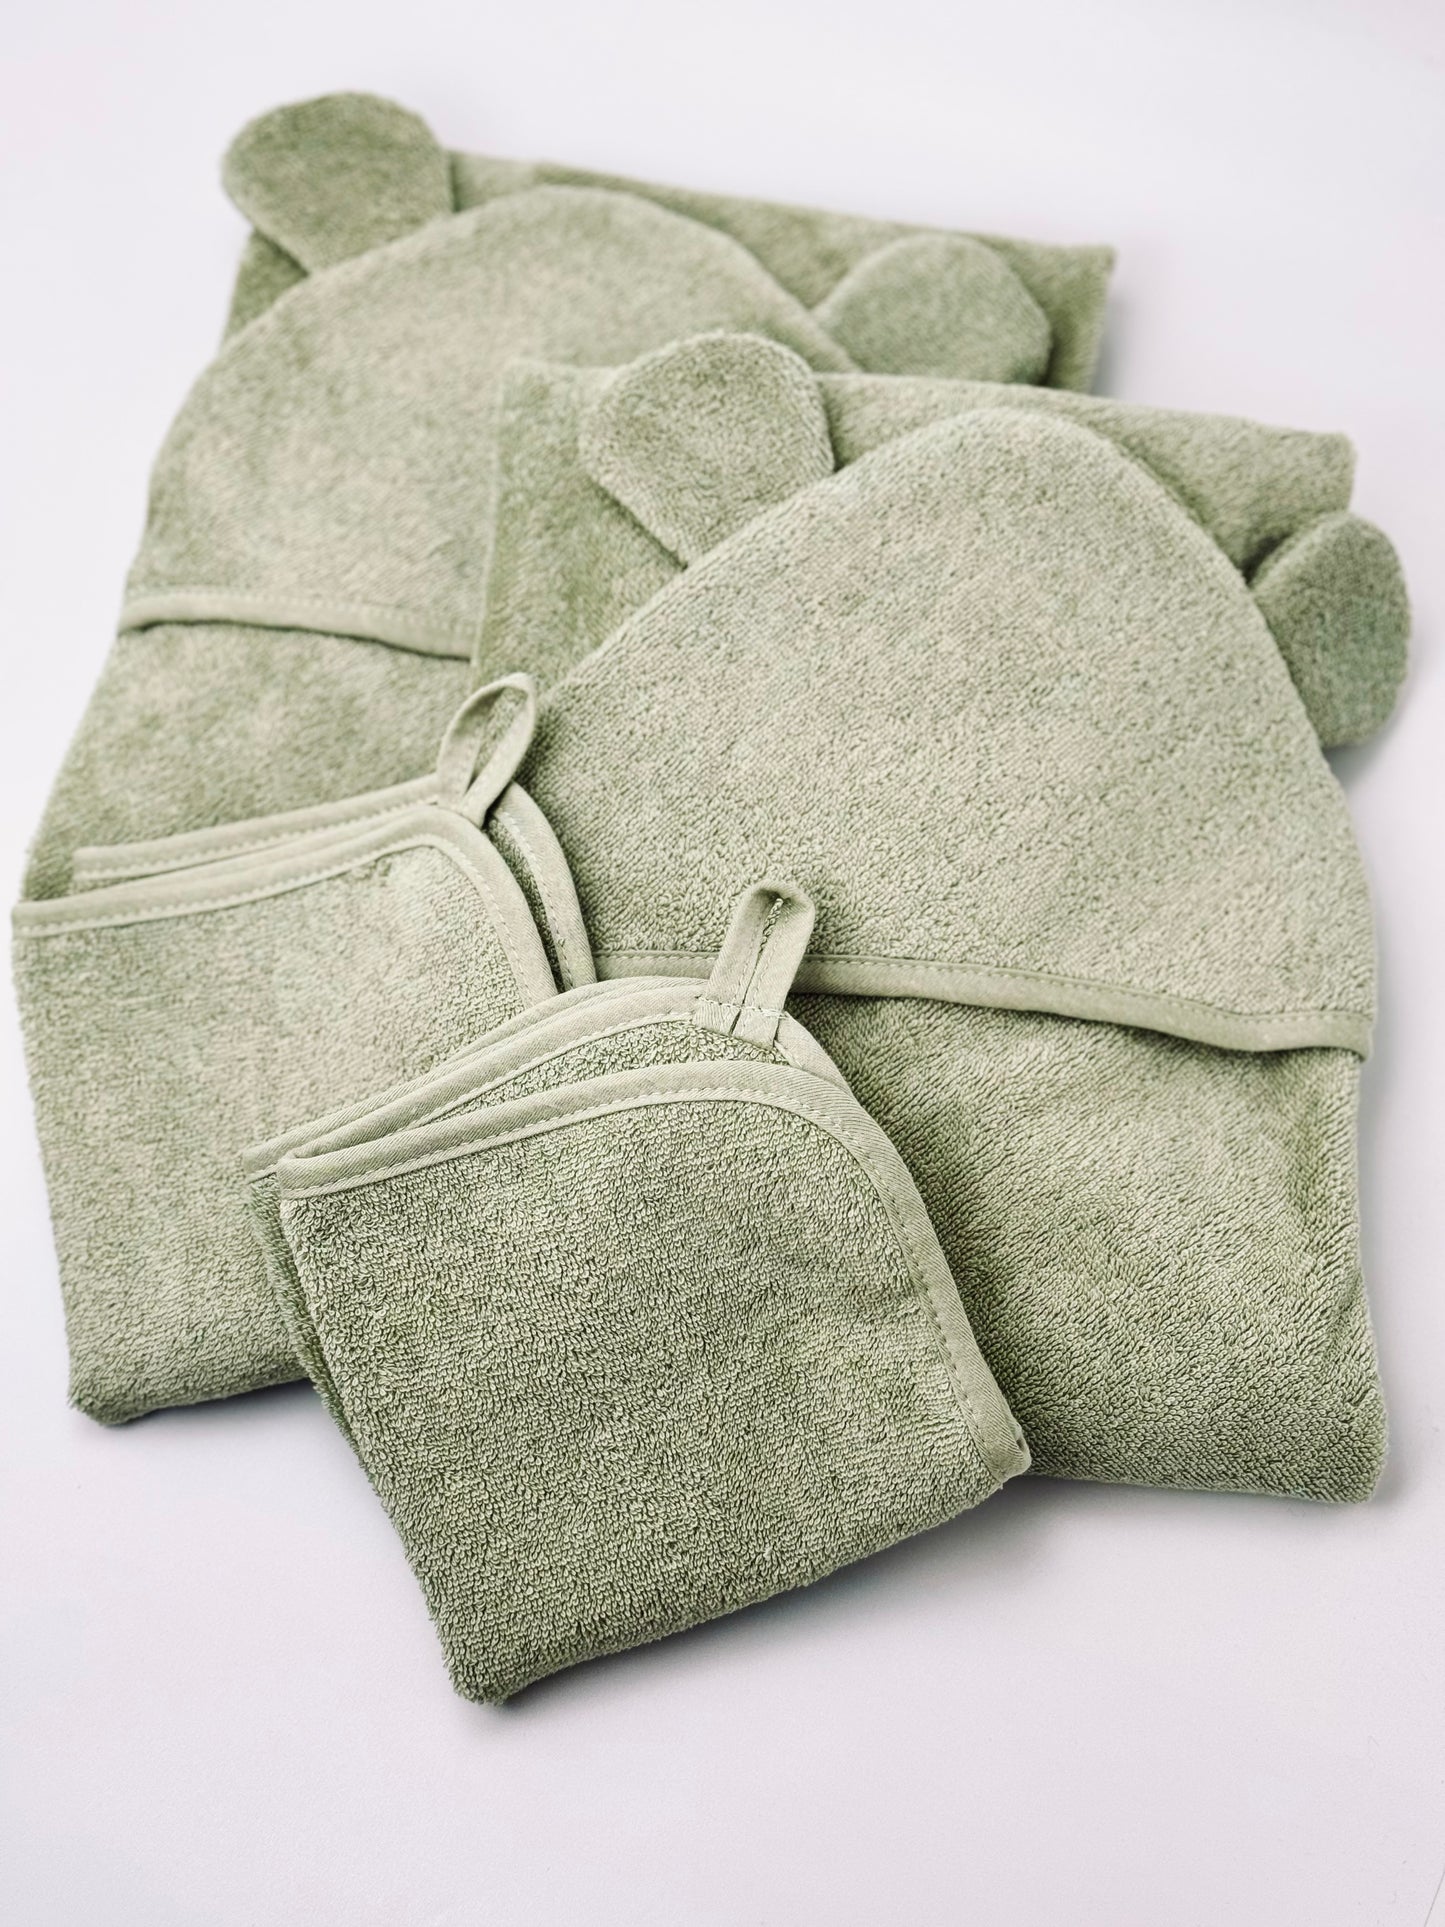 Hooded towel bear & washcloth in a set in the color sage